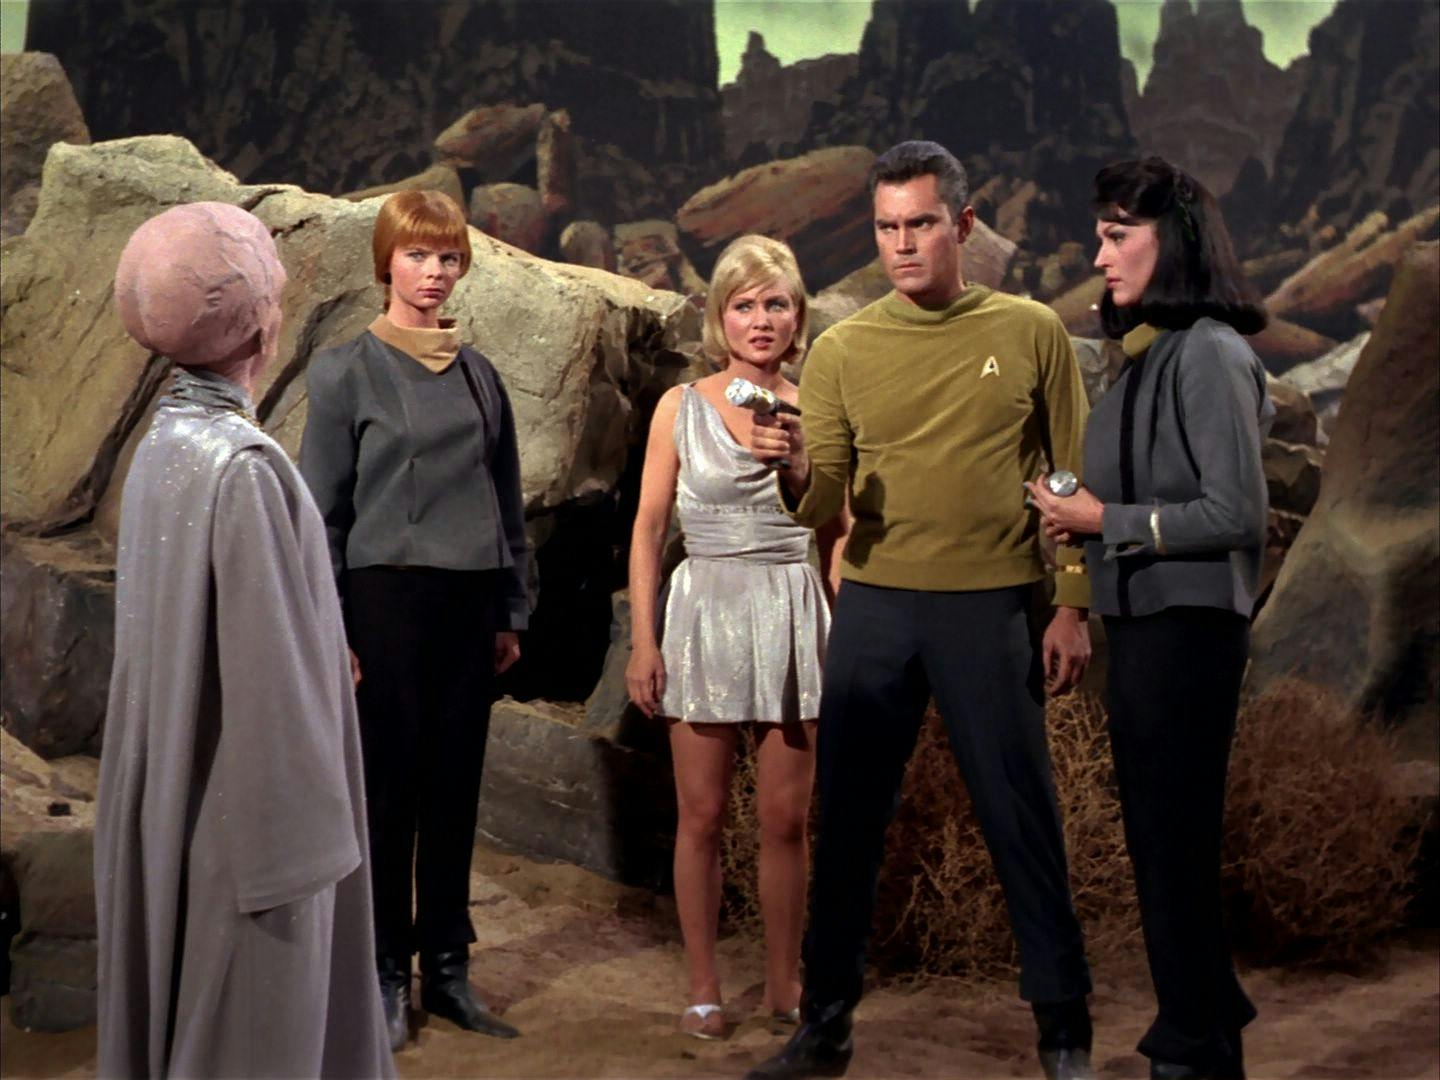 Pike points his phaser towards at the Talosian magistrate while yeoman J.M. Colt, Vina, and Number One stand by his side on Talos IV's surface in 'The Cage'